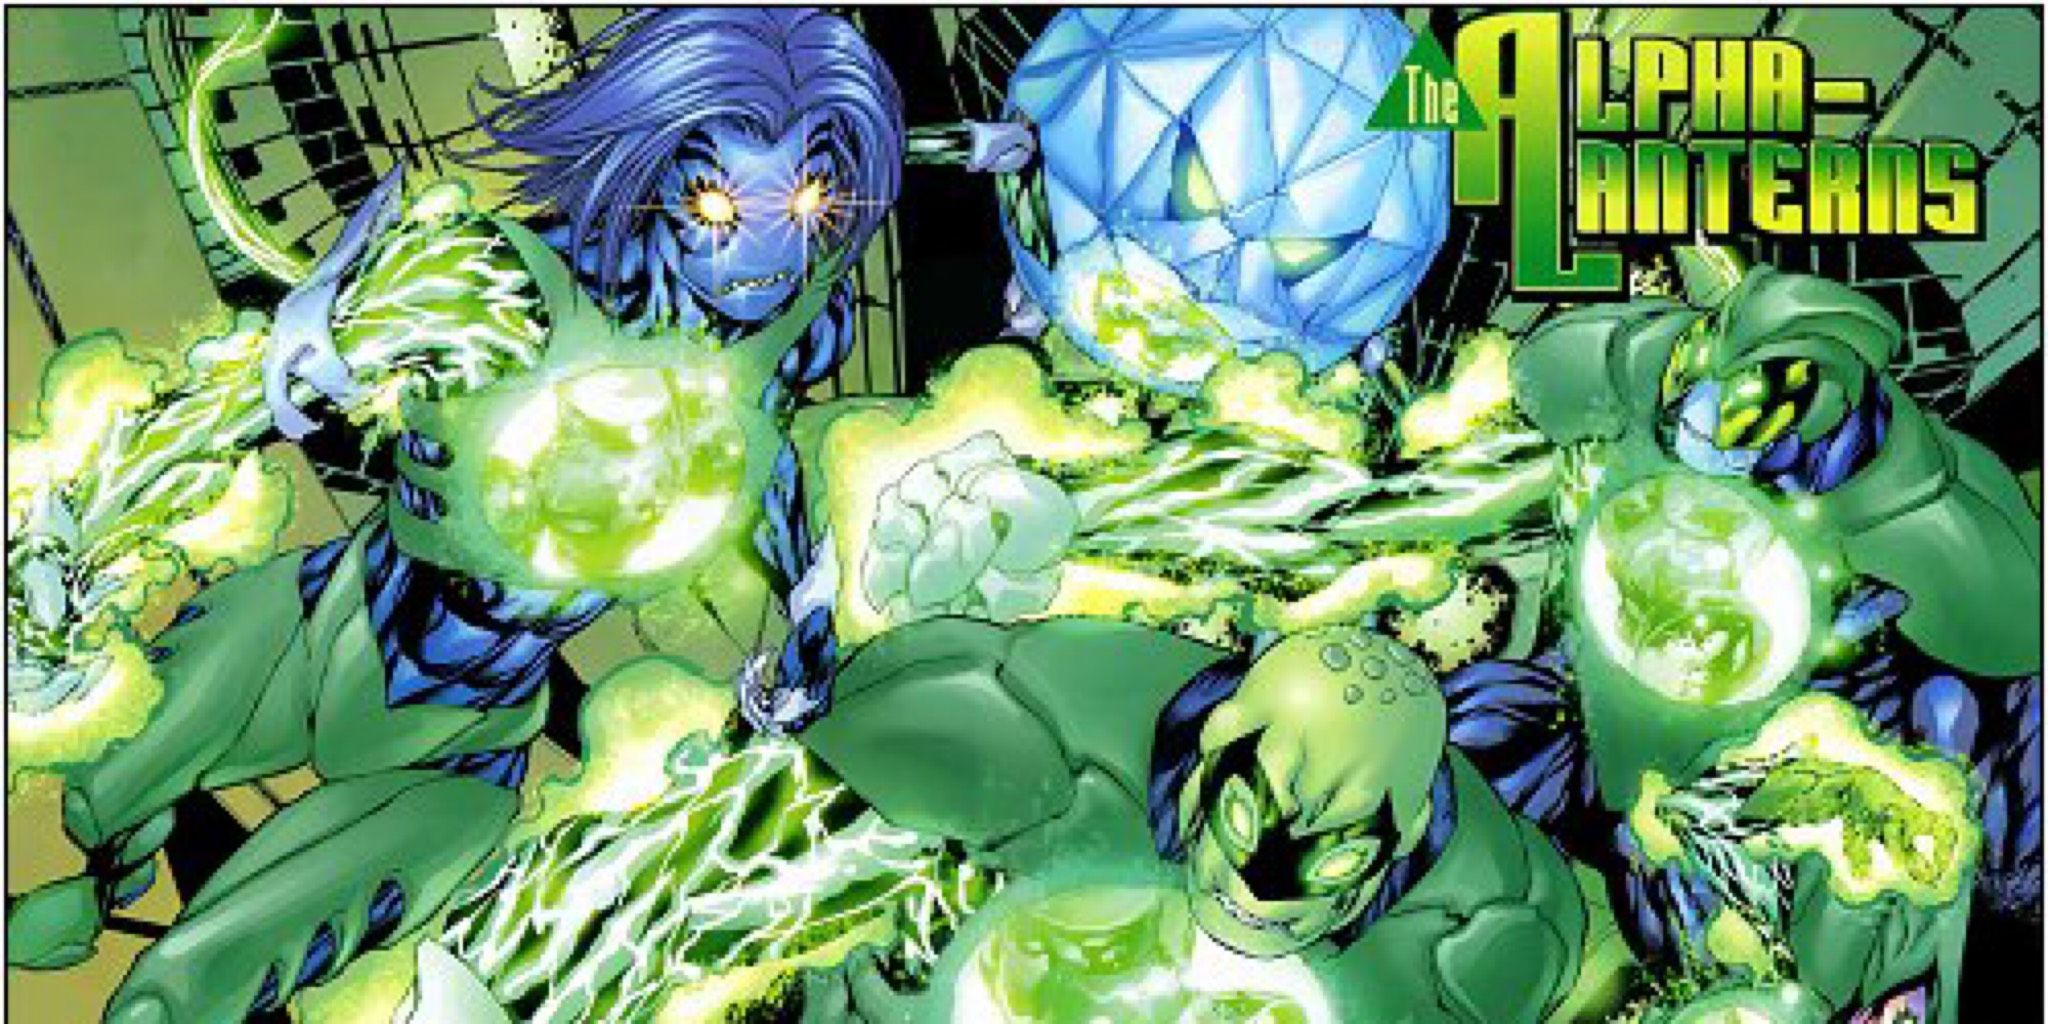 An image of the Ultraviolet Lantern Corps making their debut in DC Comics